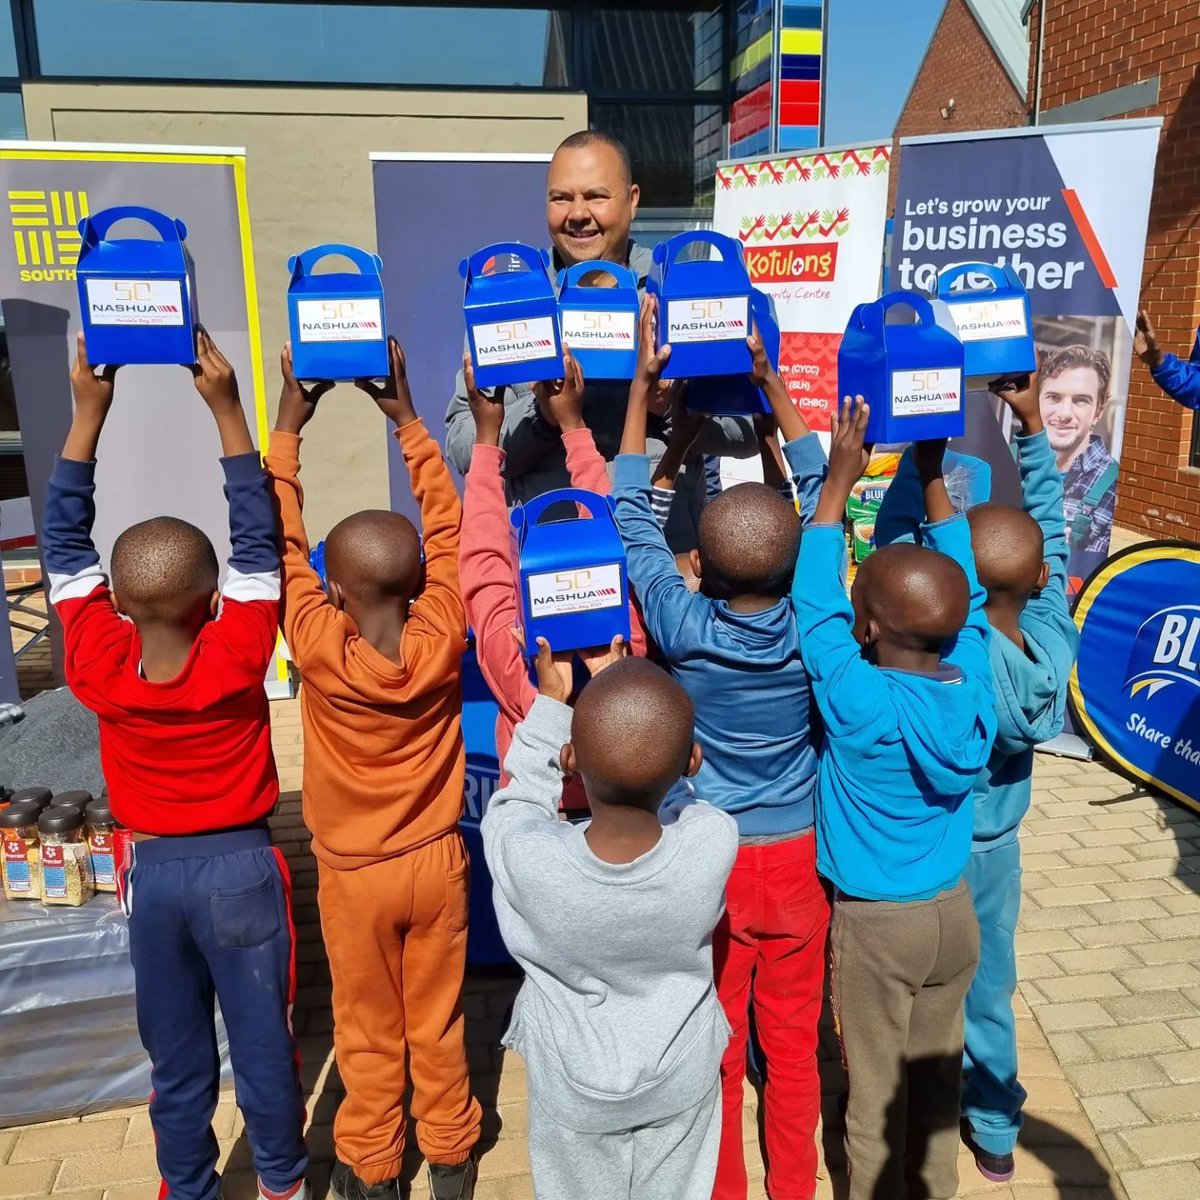 📣 #MandelaDay Update 🙌

We had the pleasure of joining forces with our MMCs at the Kotulong Community Centre - KCC. Together, we dedicated ourselves to support the center with meal preparation, engaging sports activities, and exciting games for the kids. #67Minutes